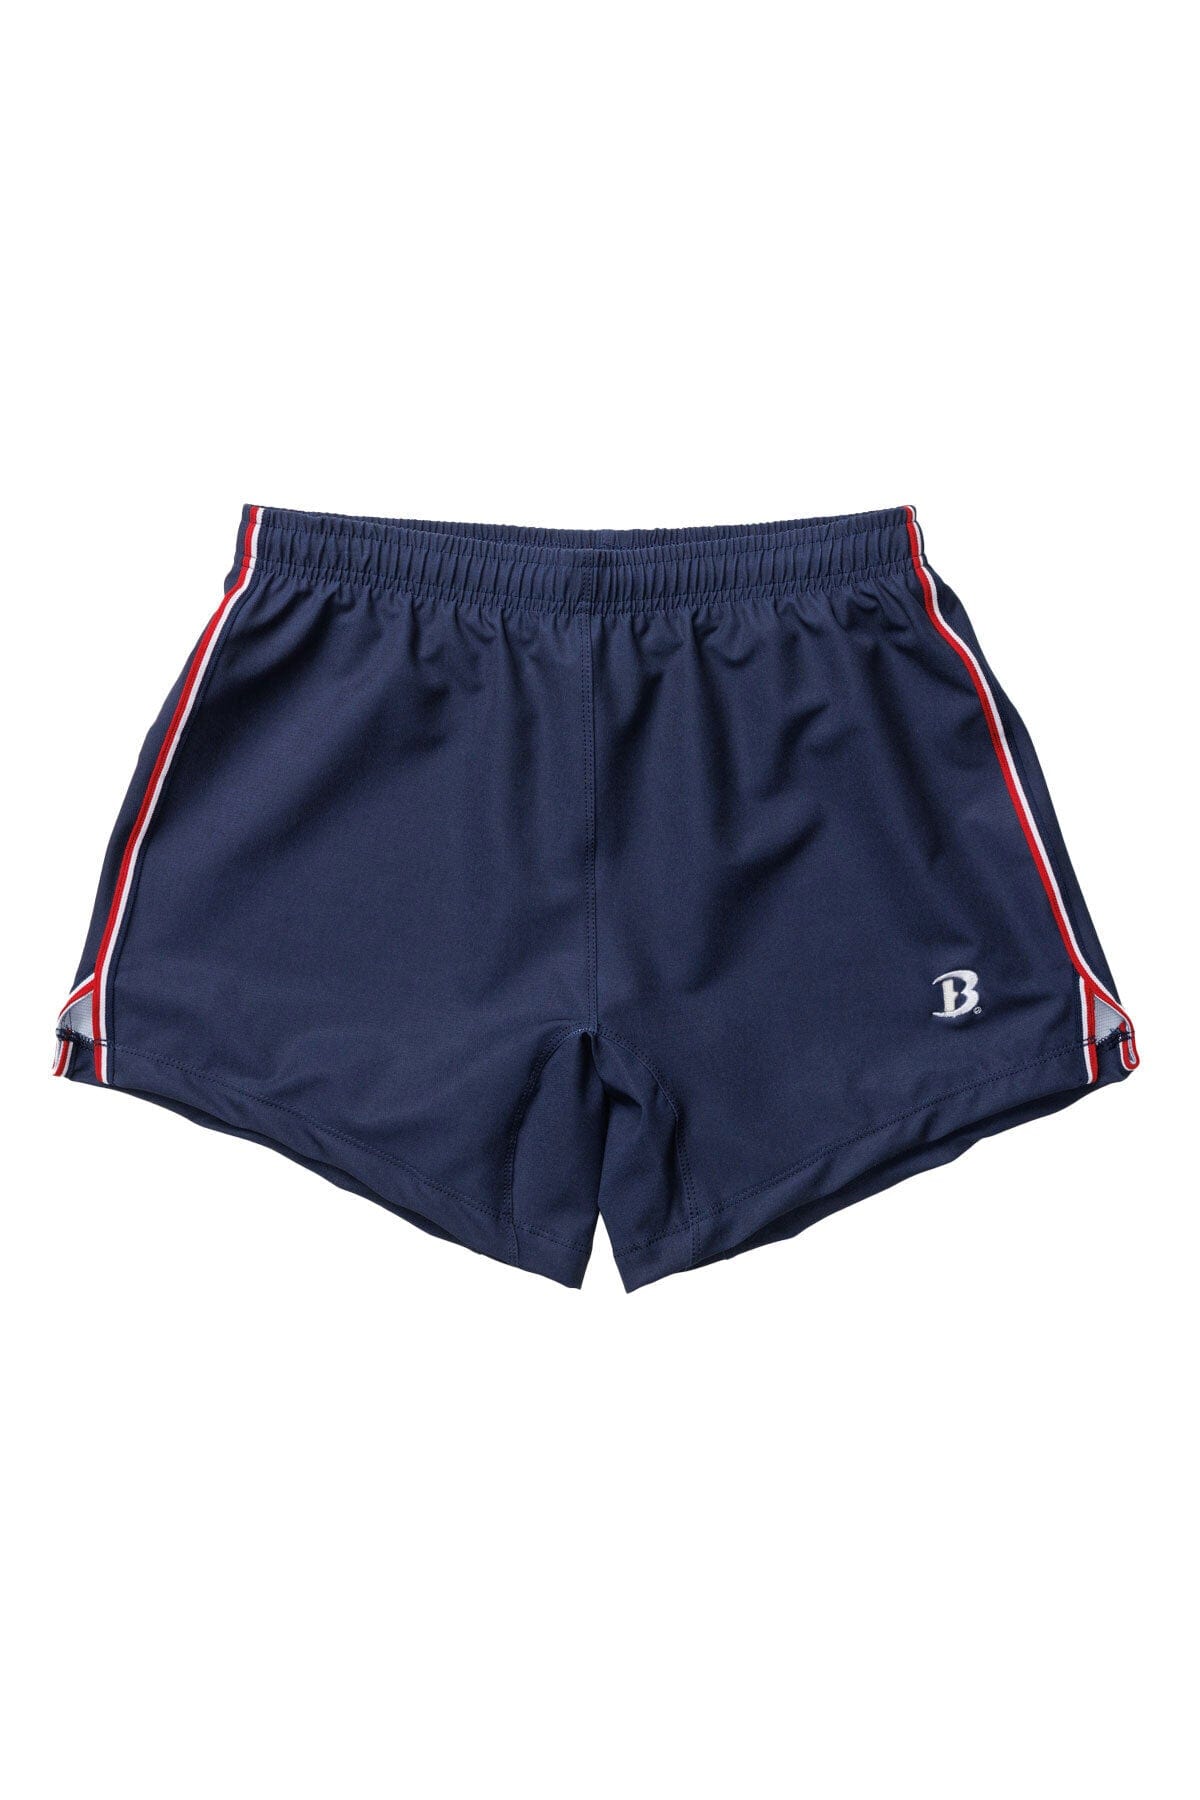 BOATHOUSE Rugby Unisex Shorts Navy / X-Small